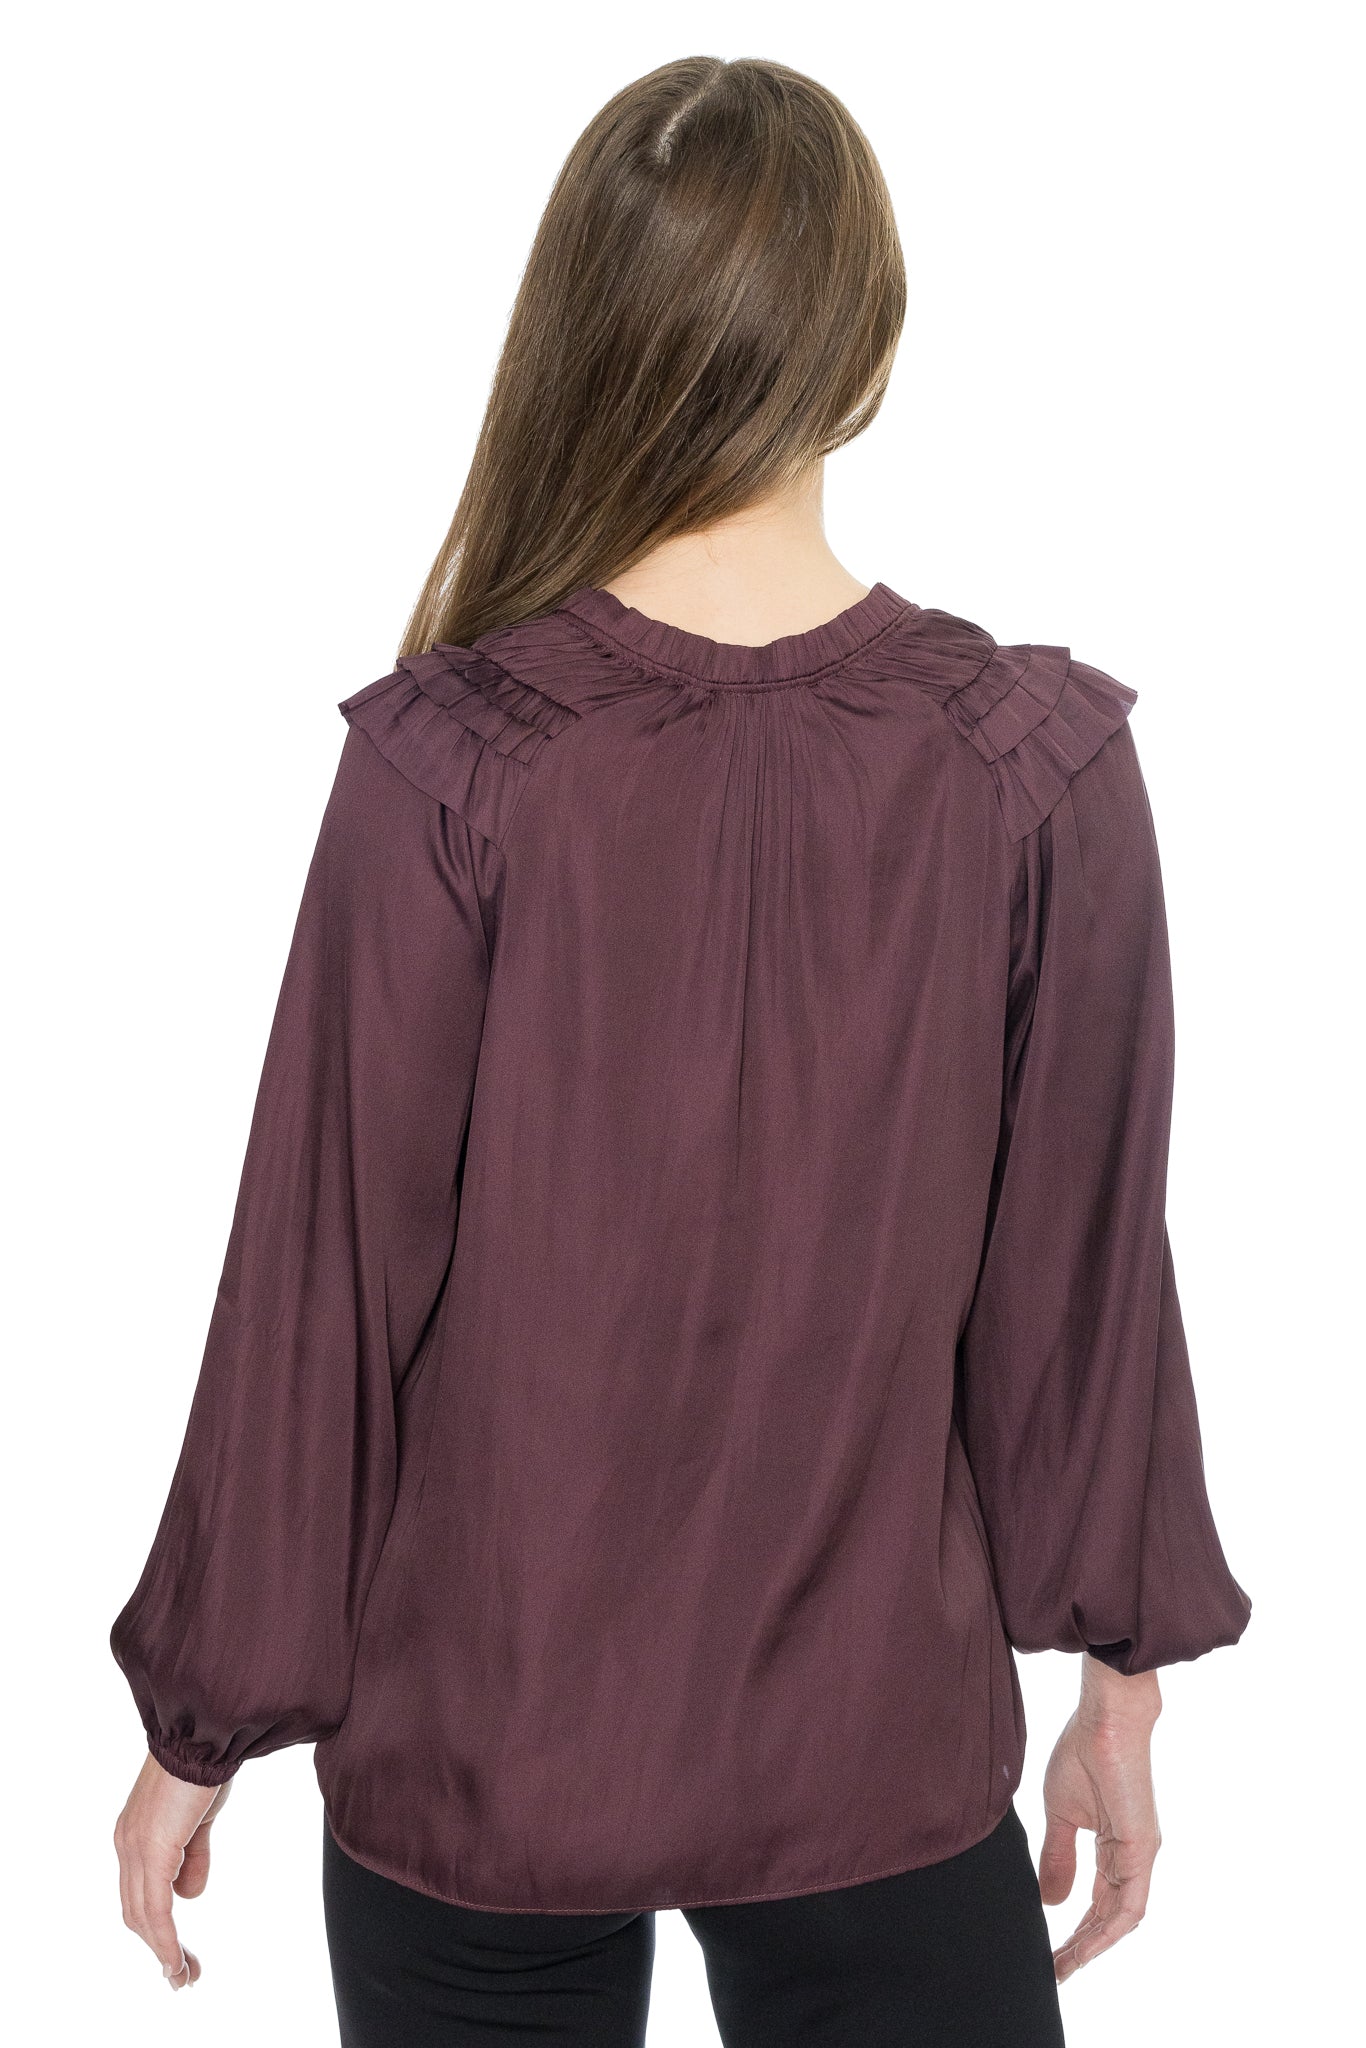 Ava Blouse by Common Collection